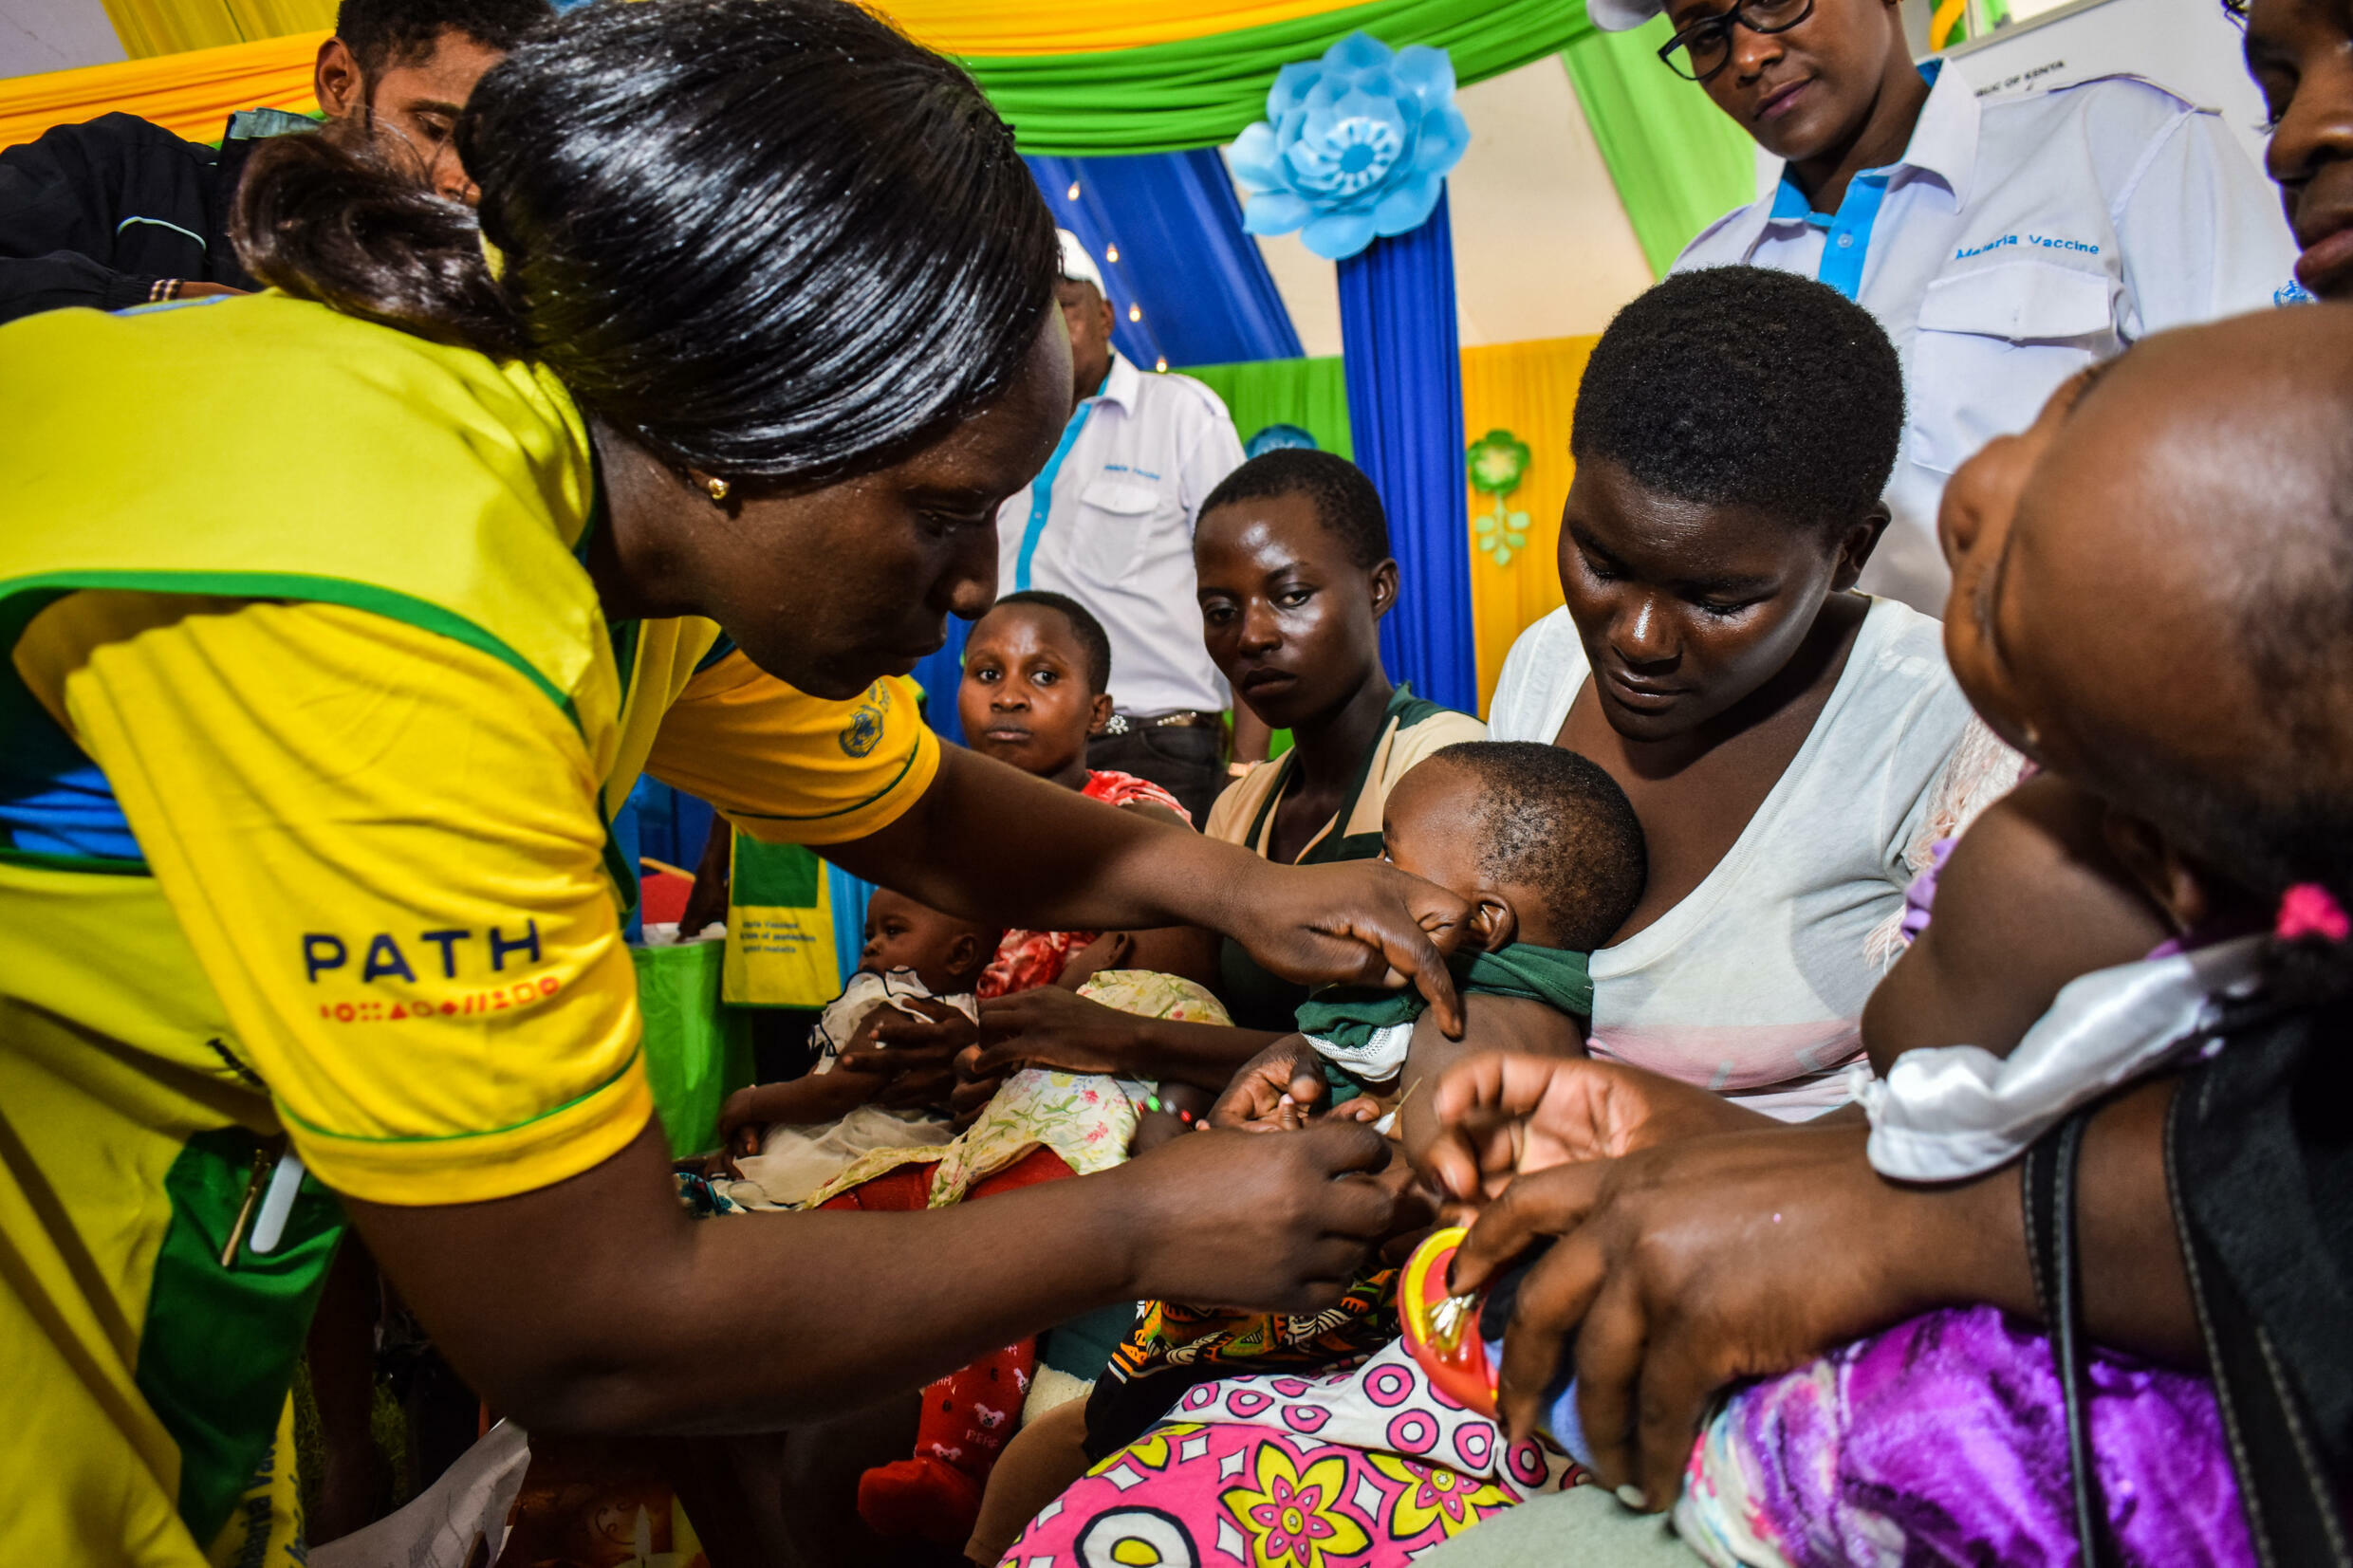 A child gets vaccinated against malaria on September 13, 2019 in Ndhiwa, Kenya.